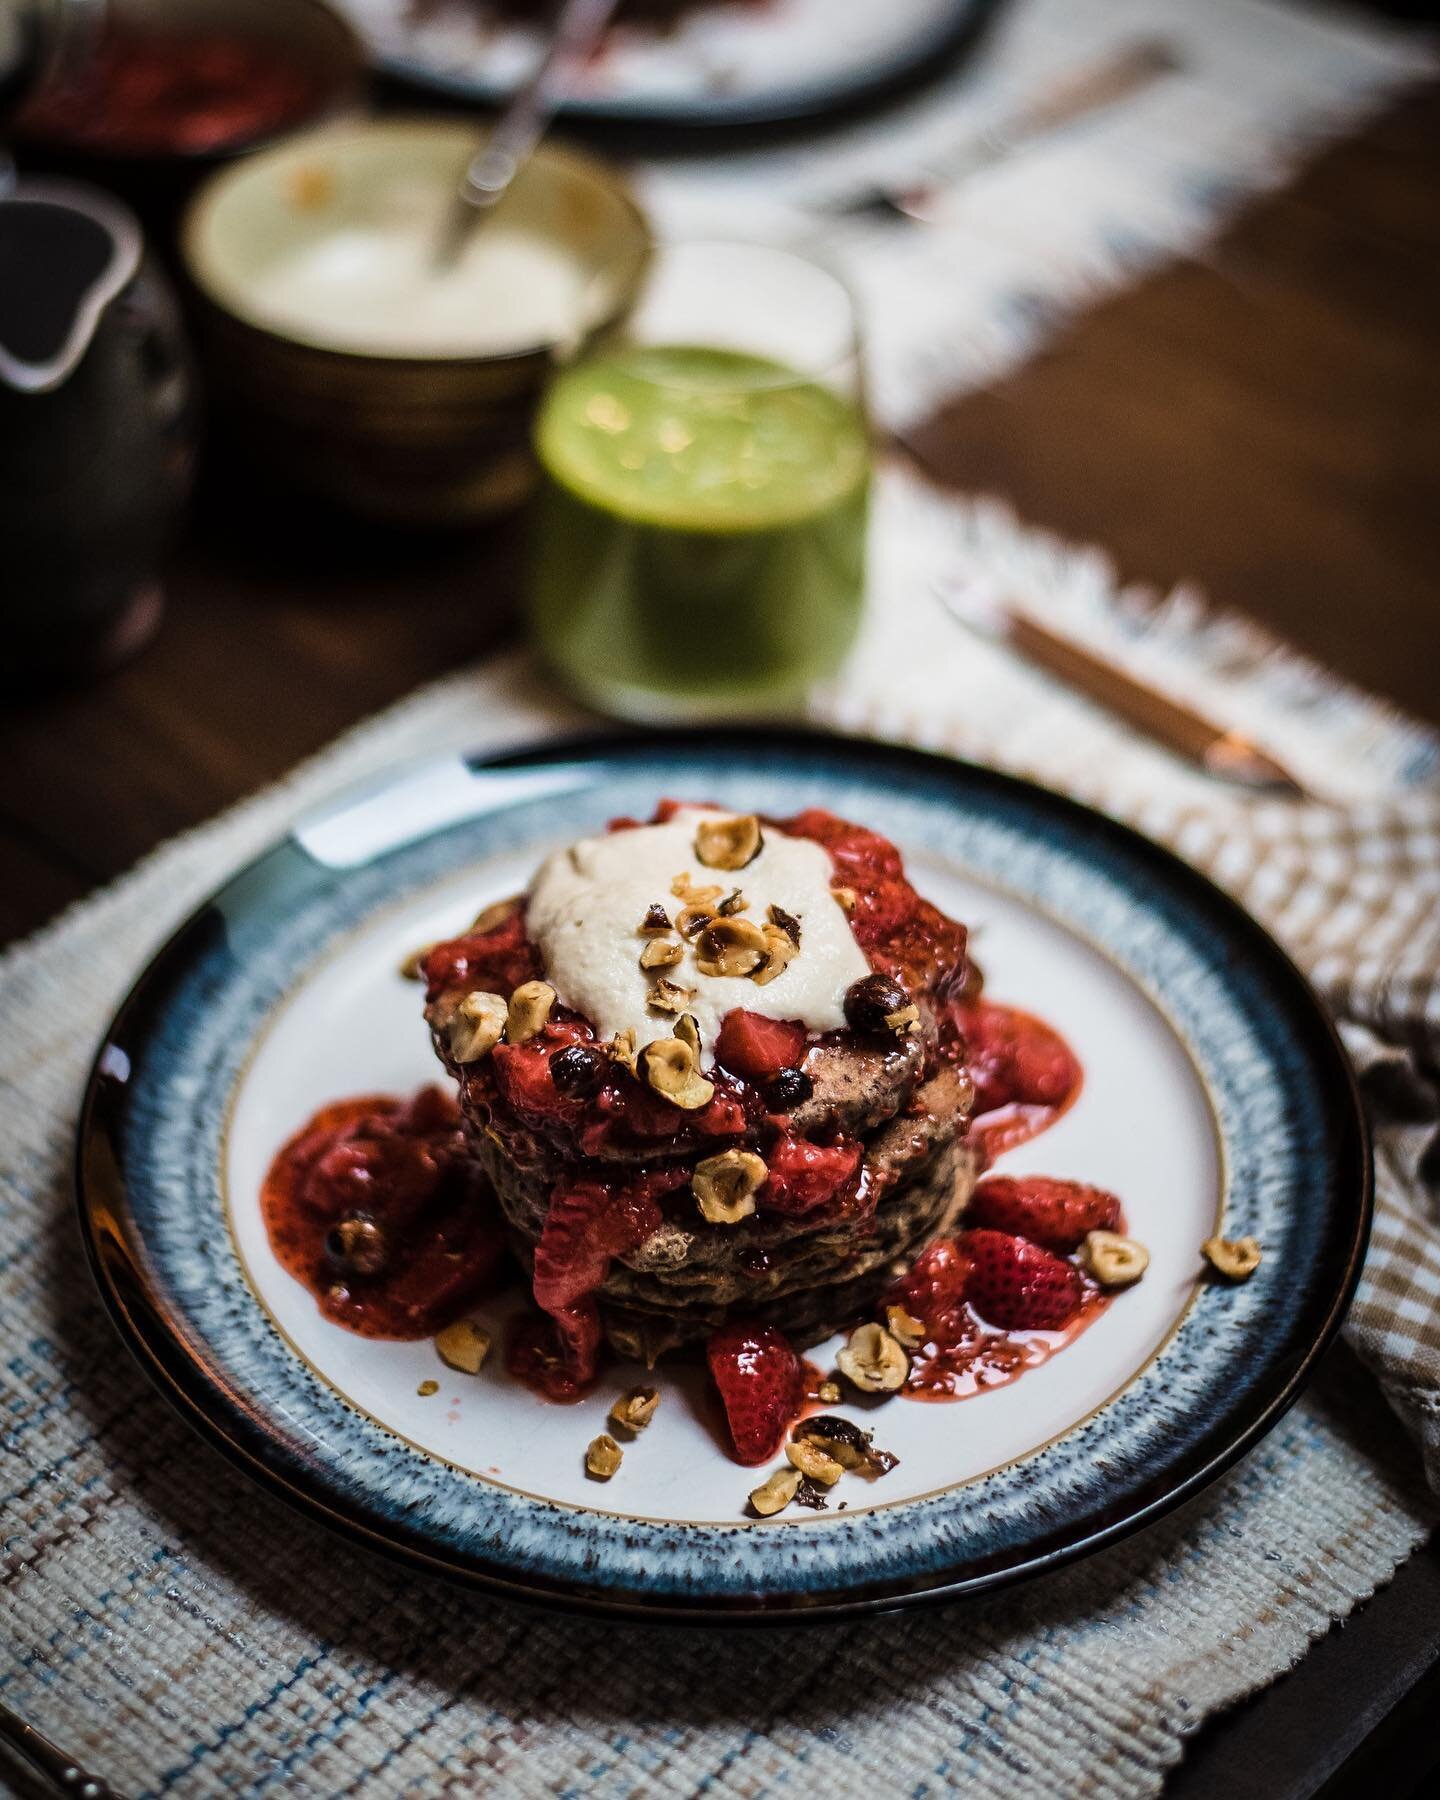 Pancakes for Sunday Brunch! Servings Powwa Pancakes at @switchboard_cafe with local rhubarb compote, maple cashew cream, BC hazelnuts and of course maple syrup. May 22! Organic ✔️ wheat free ✔️ dairy free ✔️

/ as featured in @folklifemedia 
/ photo 